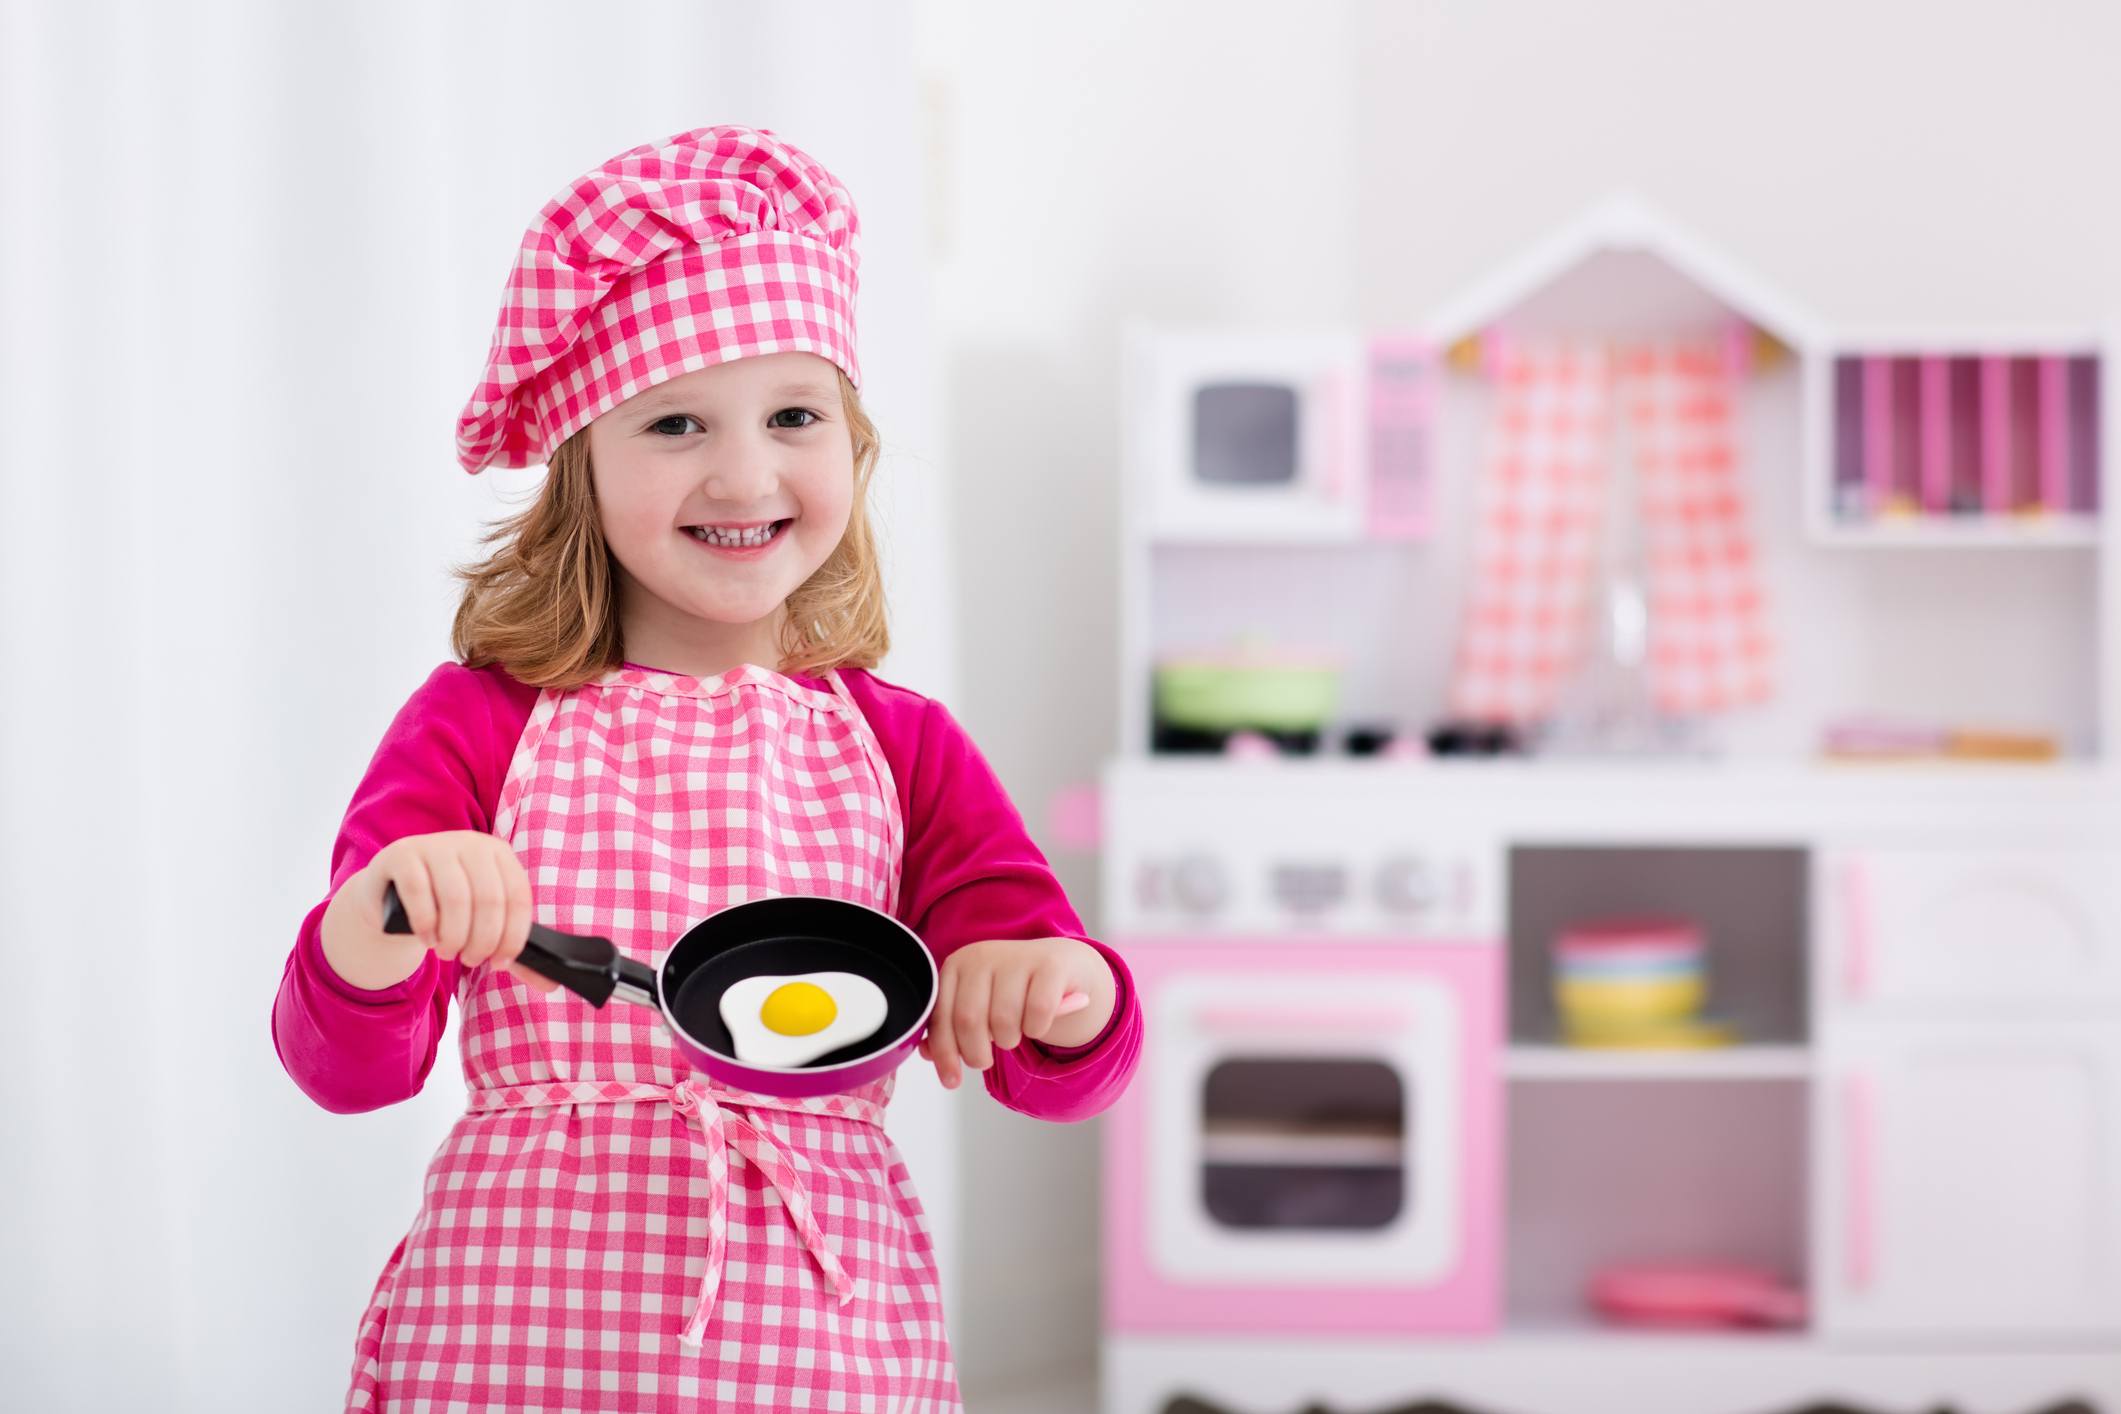 Cute little girl playing with toy kitchen